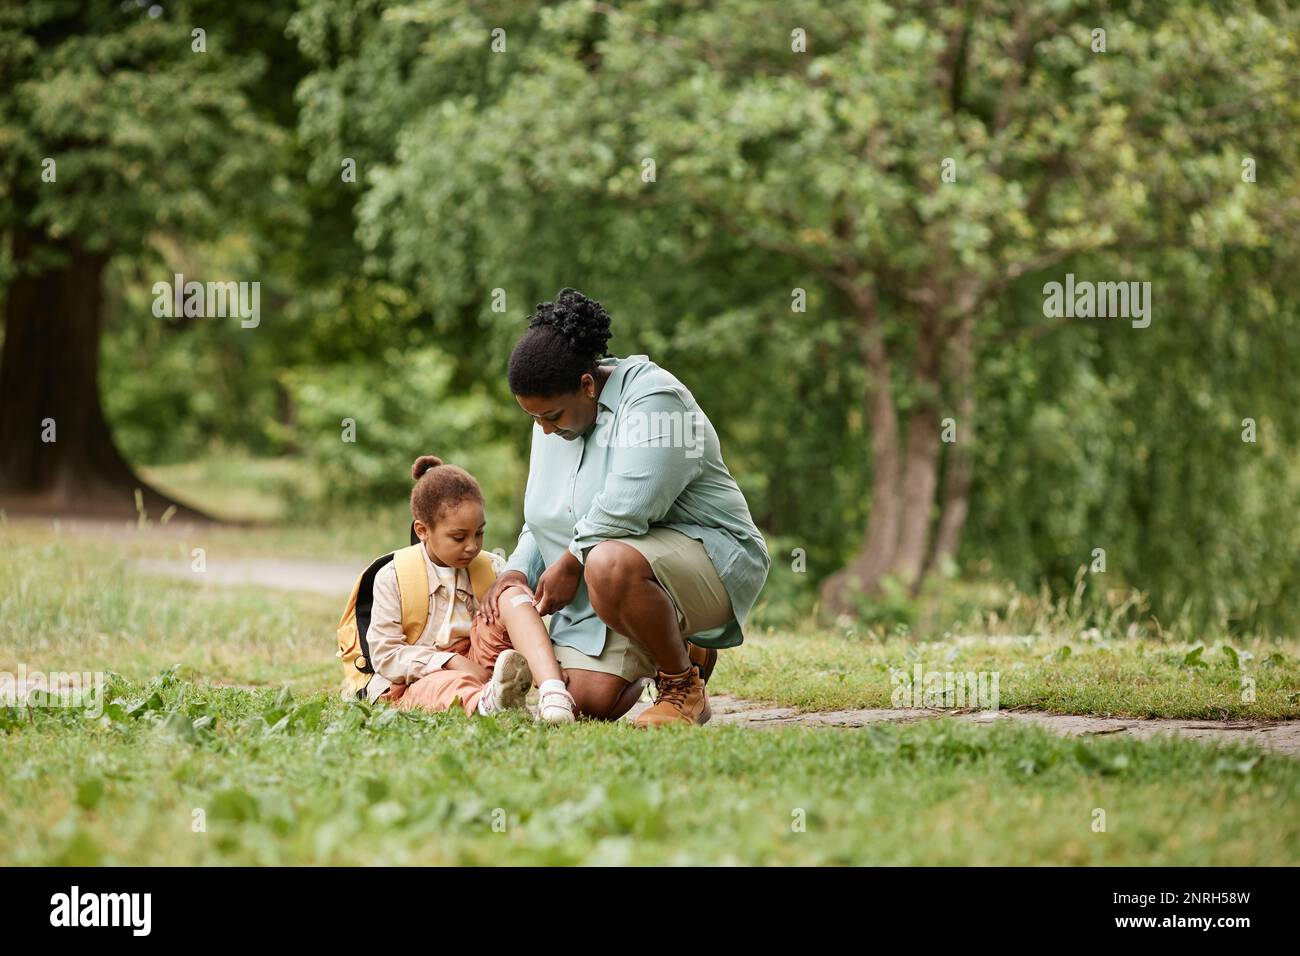 Loving mother putting band aid on knee of little girl injured during nature hike, copy space Stock Photo